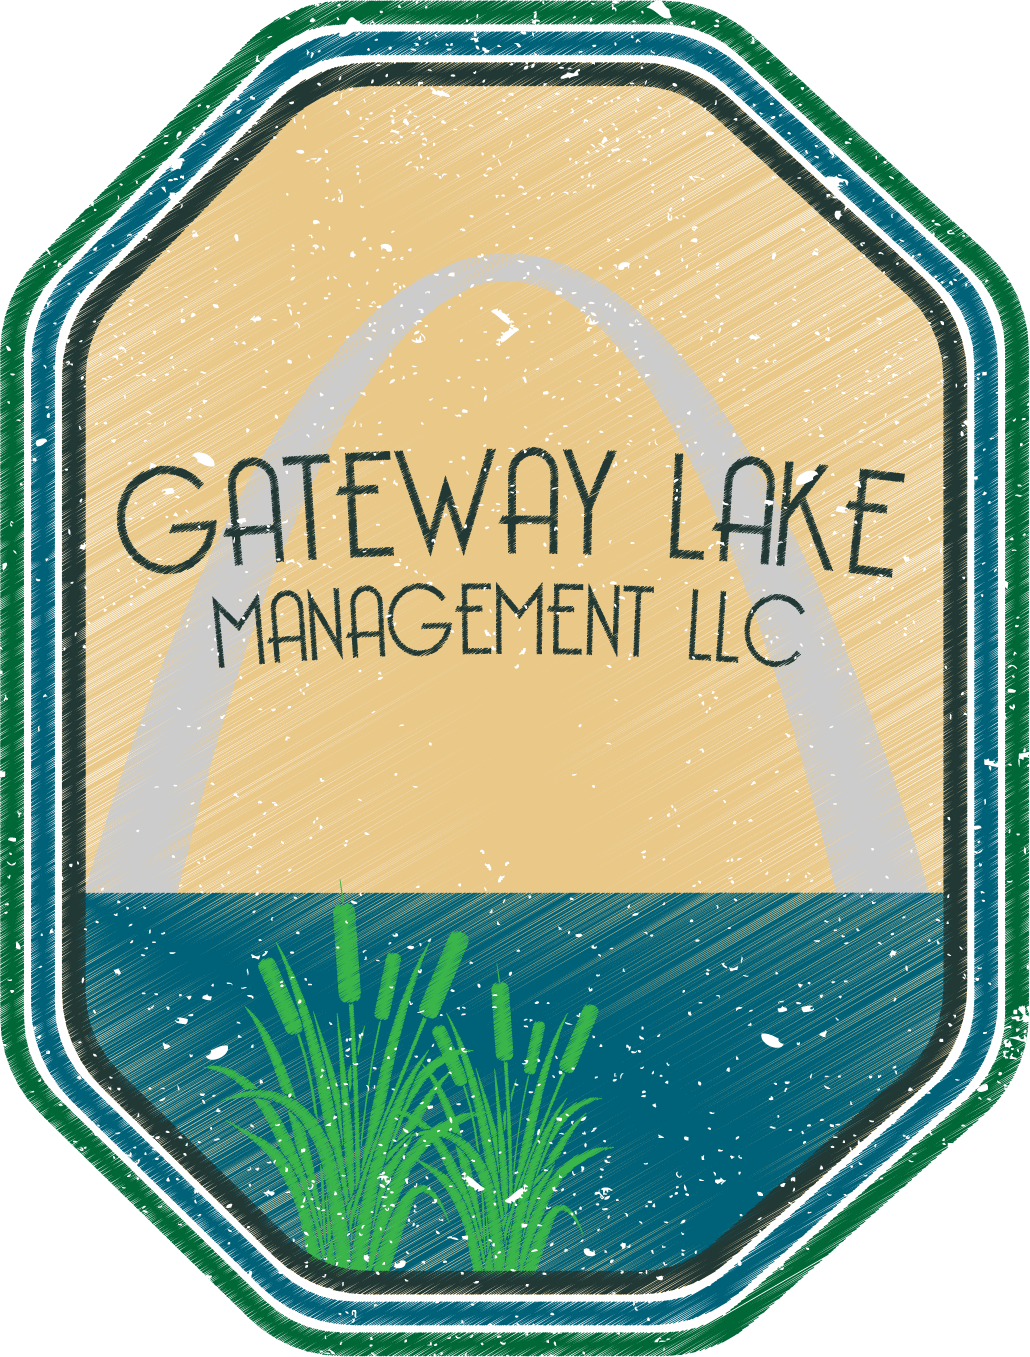 Gateway Lake Management LLC logo with St. Louis arch, pond and cattails